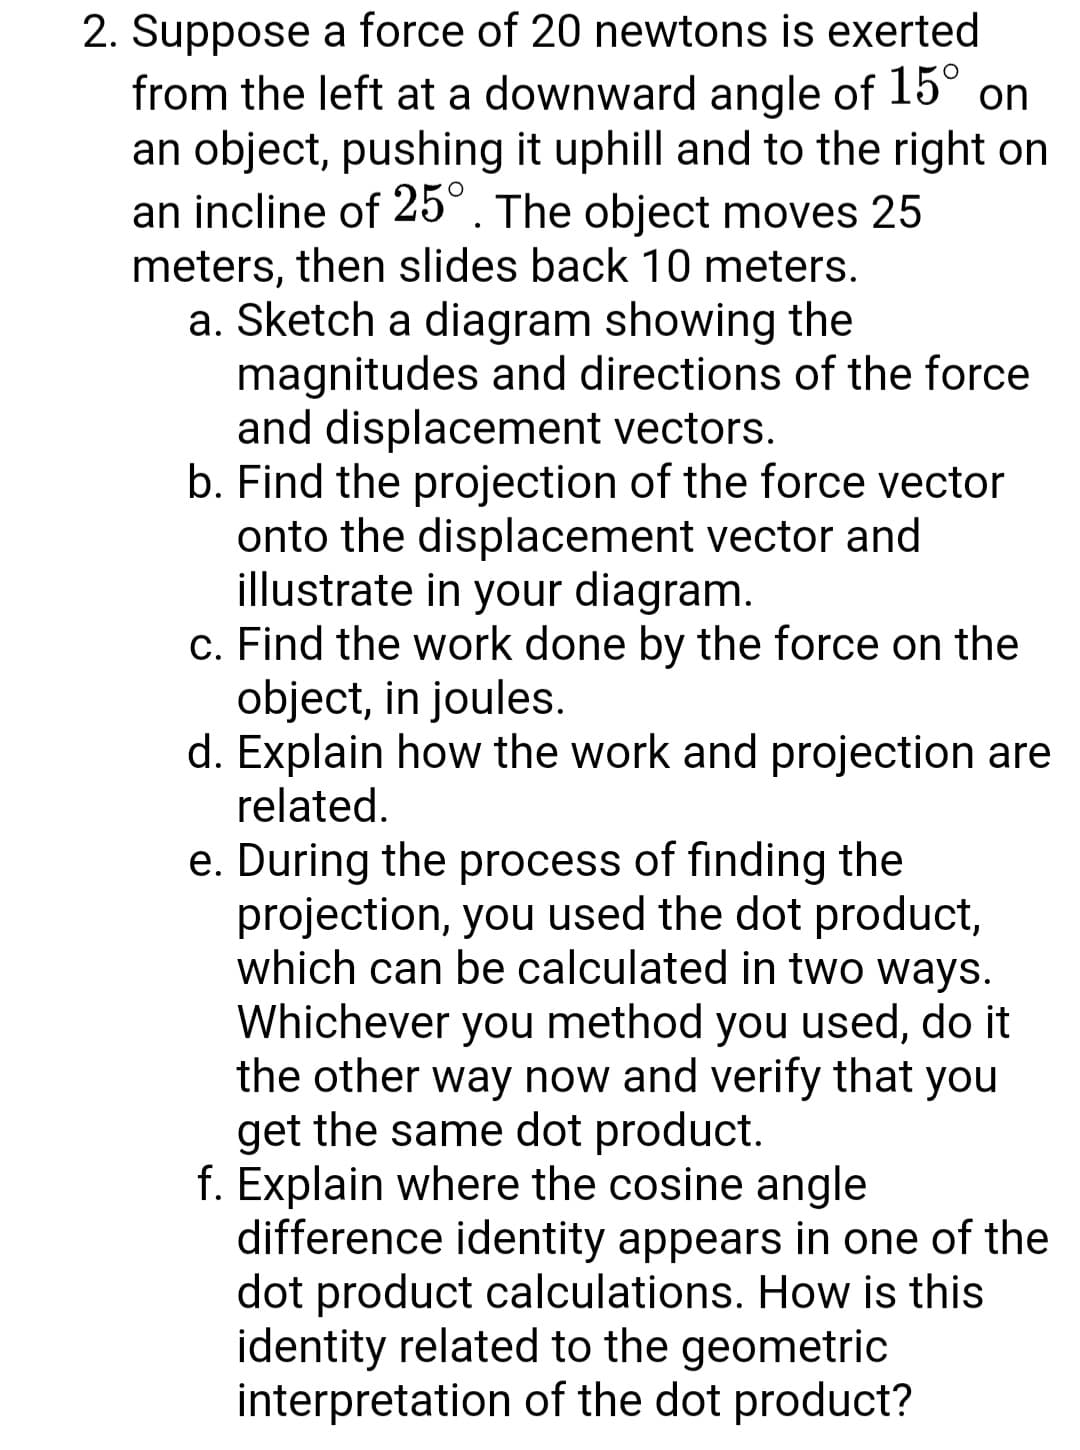 2. Suppose a force of 20 newtons is exerted
from the left at a downward angle of 15° on
an object, pushing it uphill and to the right on
an incline of 25°. The object moves 25
meters, then slides back 10 meters.
a. Sketch a diagram showing the
magnitudes and directions of the force
and displacement vectors.
b. Find the projection of the force vector
onto the displacement vector and
illustrate in your diagram.
c. Find the work done by the force on the
object, in joules.
d. Explain how the work and projection are
related.
e. During the process of finding the
projection, you used the dot product,
which can be calculated in two ways.
Whichever you method you used, do it
the other way now and verify that you
get the same dot product.
f. Explain where the cosine angle
difference identity appears in one of the
dot product calculations. How is this
identity related to the geometric
interpretation of the dot product?
